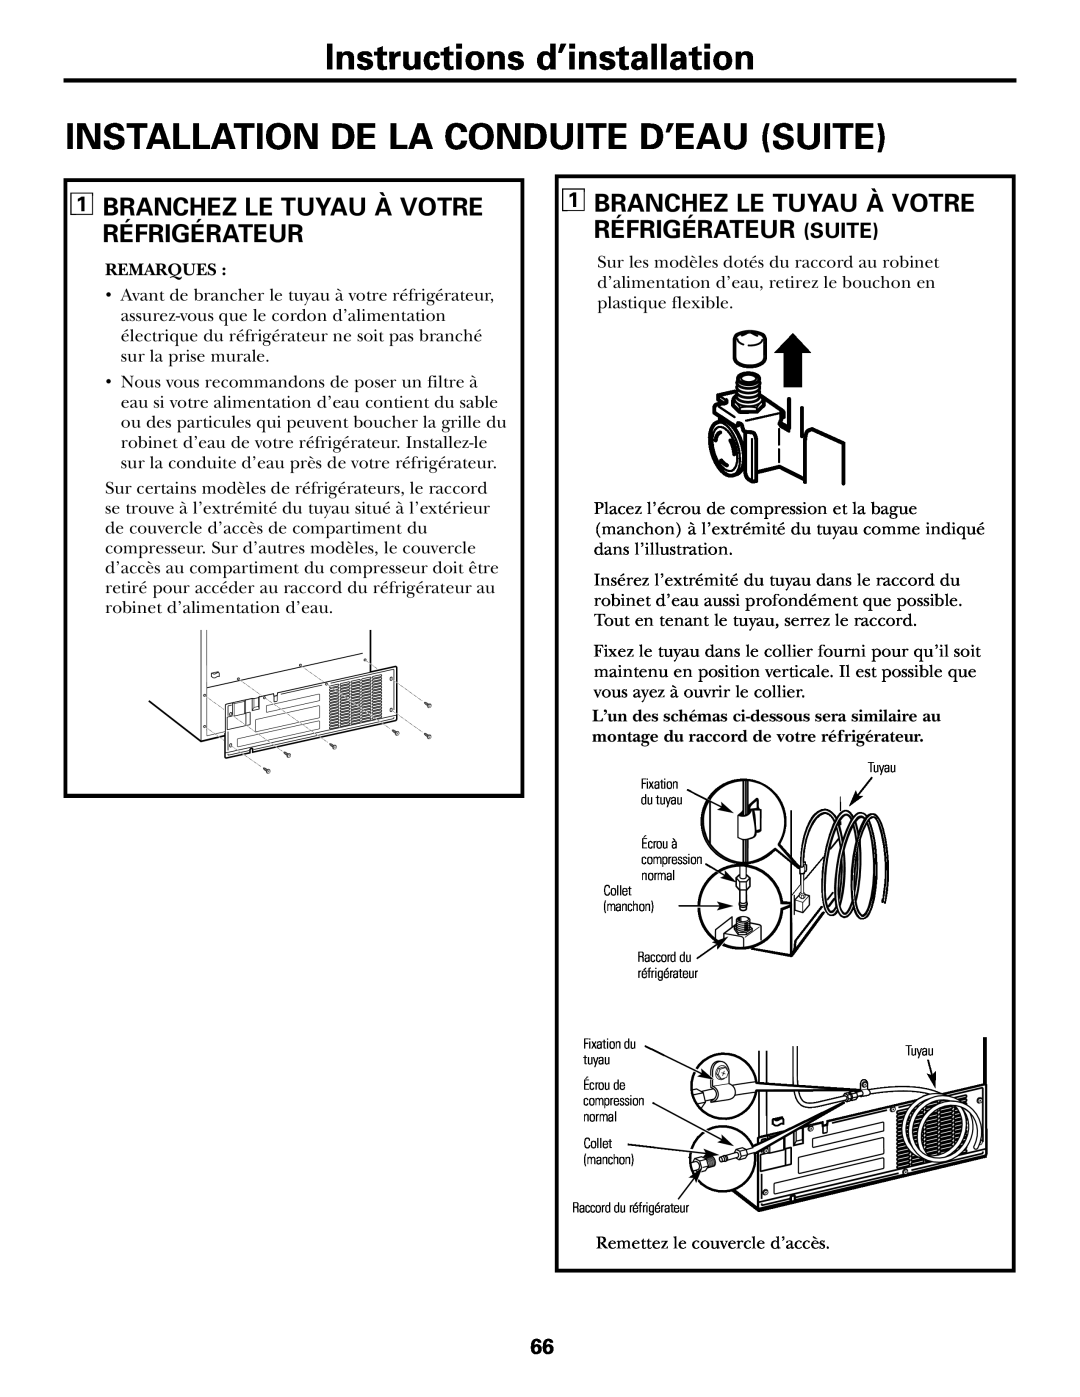 GE 21, 23, 25, 27, 29 installation instructions Instructions d’installation INSTALLATION DE LA CONDUITE D’EAU SUITE 